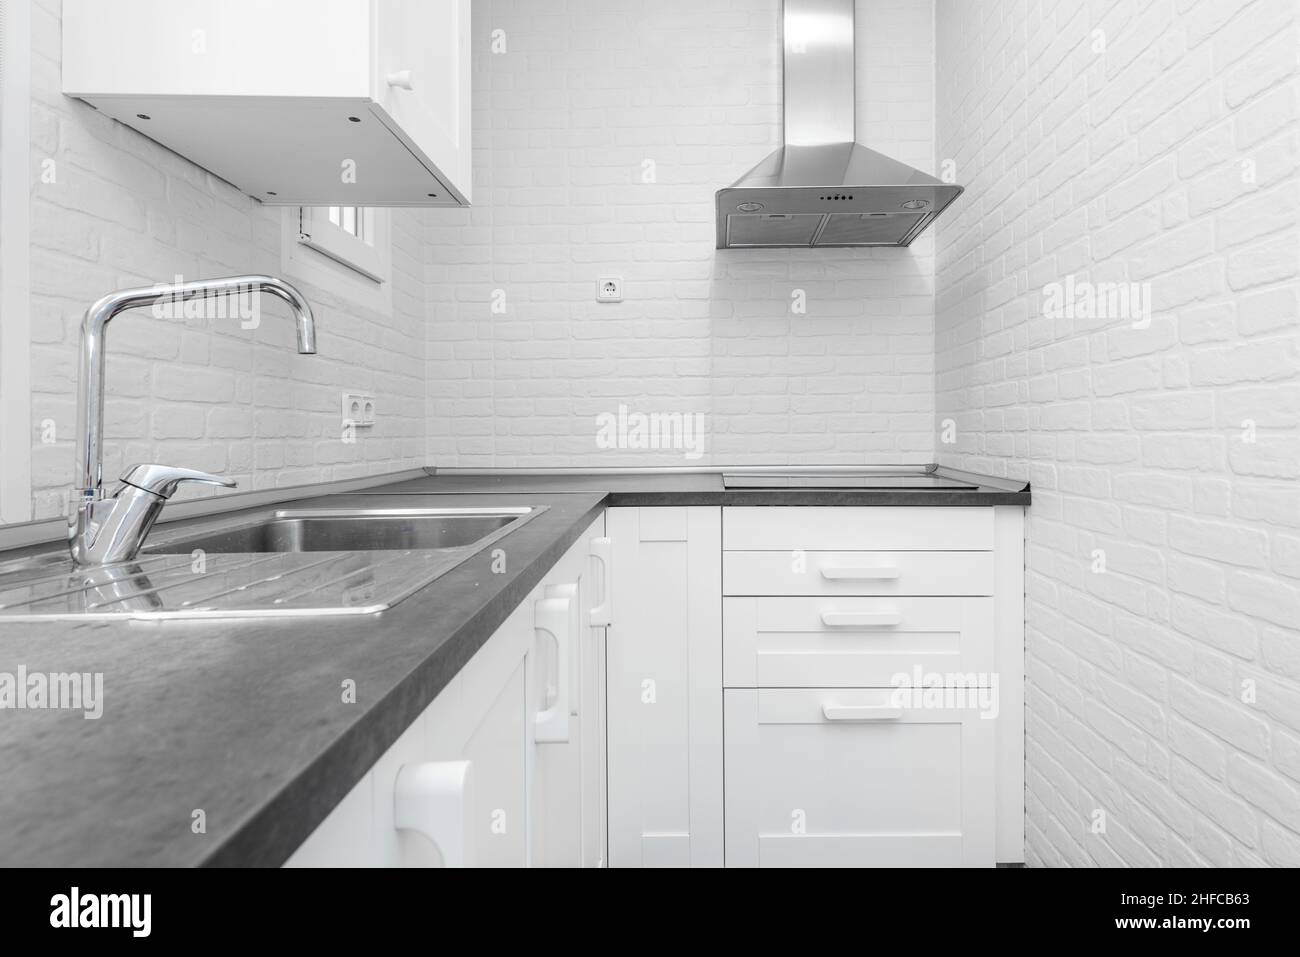 Vacation rental kitchen with white cabinets, white brick walls, gray countertop and stainless steel sink and range hood in the corner Stock Photo